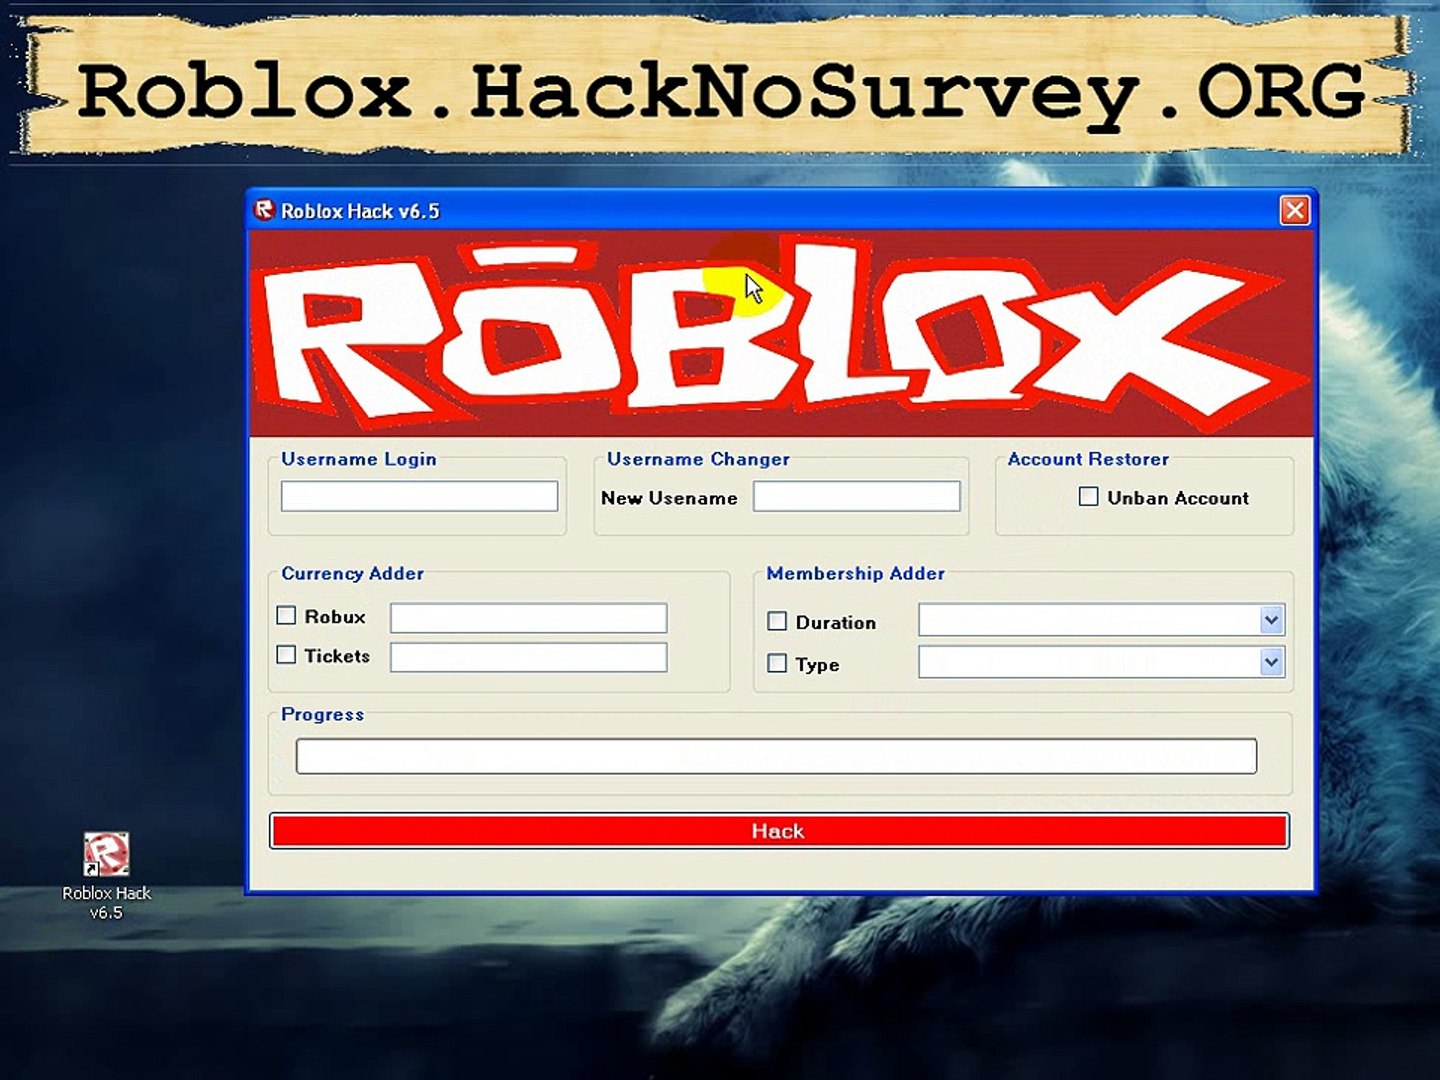 Roblox Hack Membership Adder Robux Tix Generator 2015 Video Dailymotion - working updated how to get free roblox robux tix hack generator